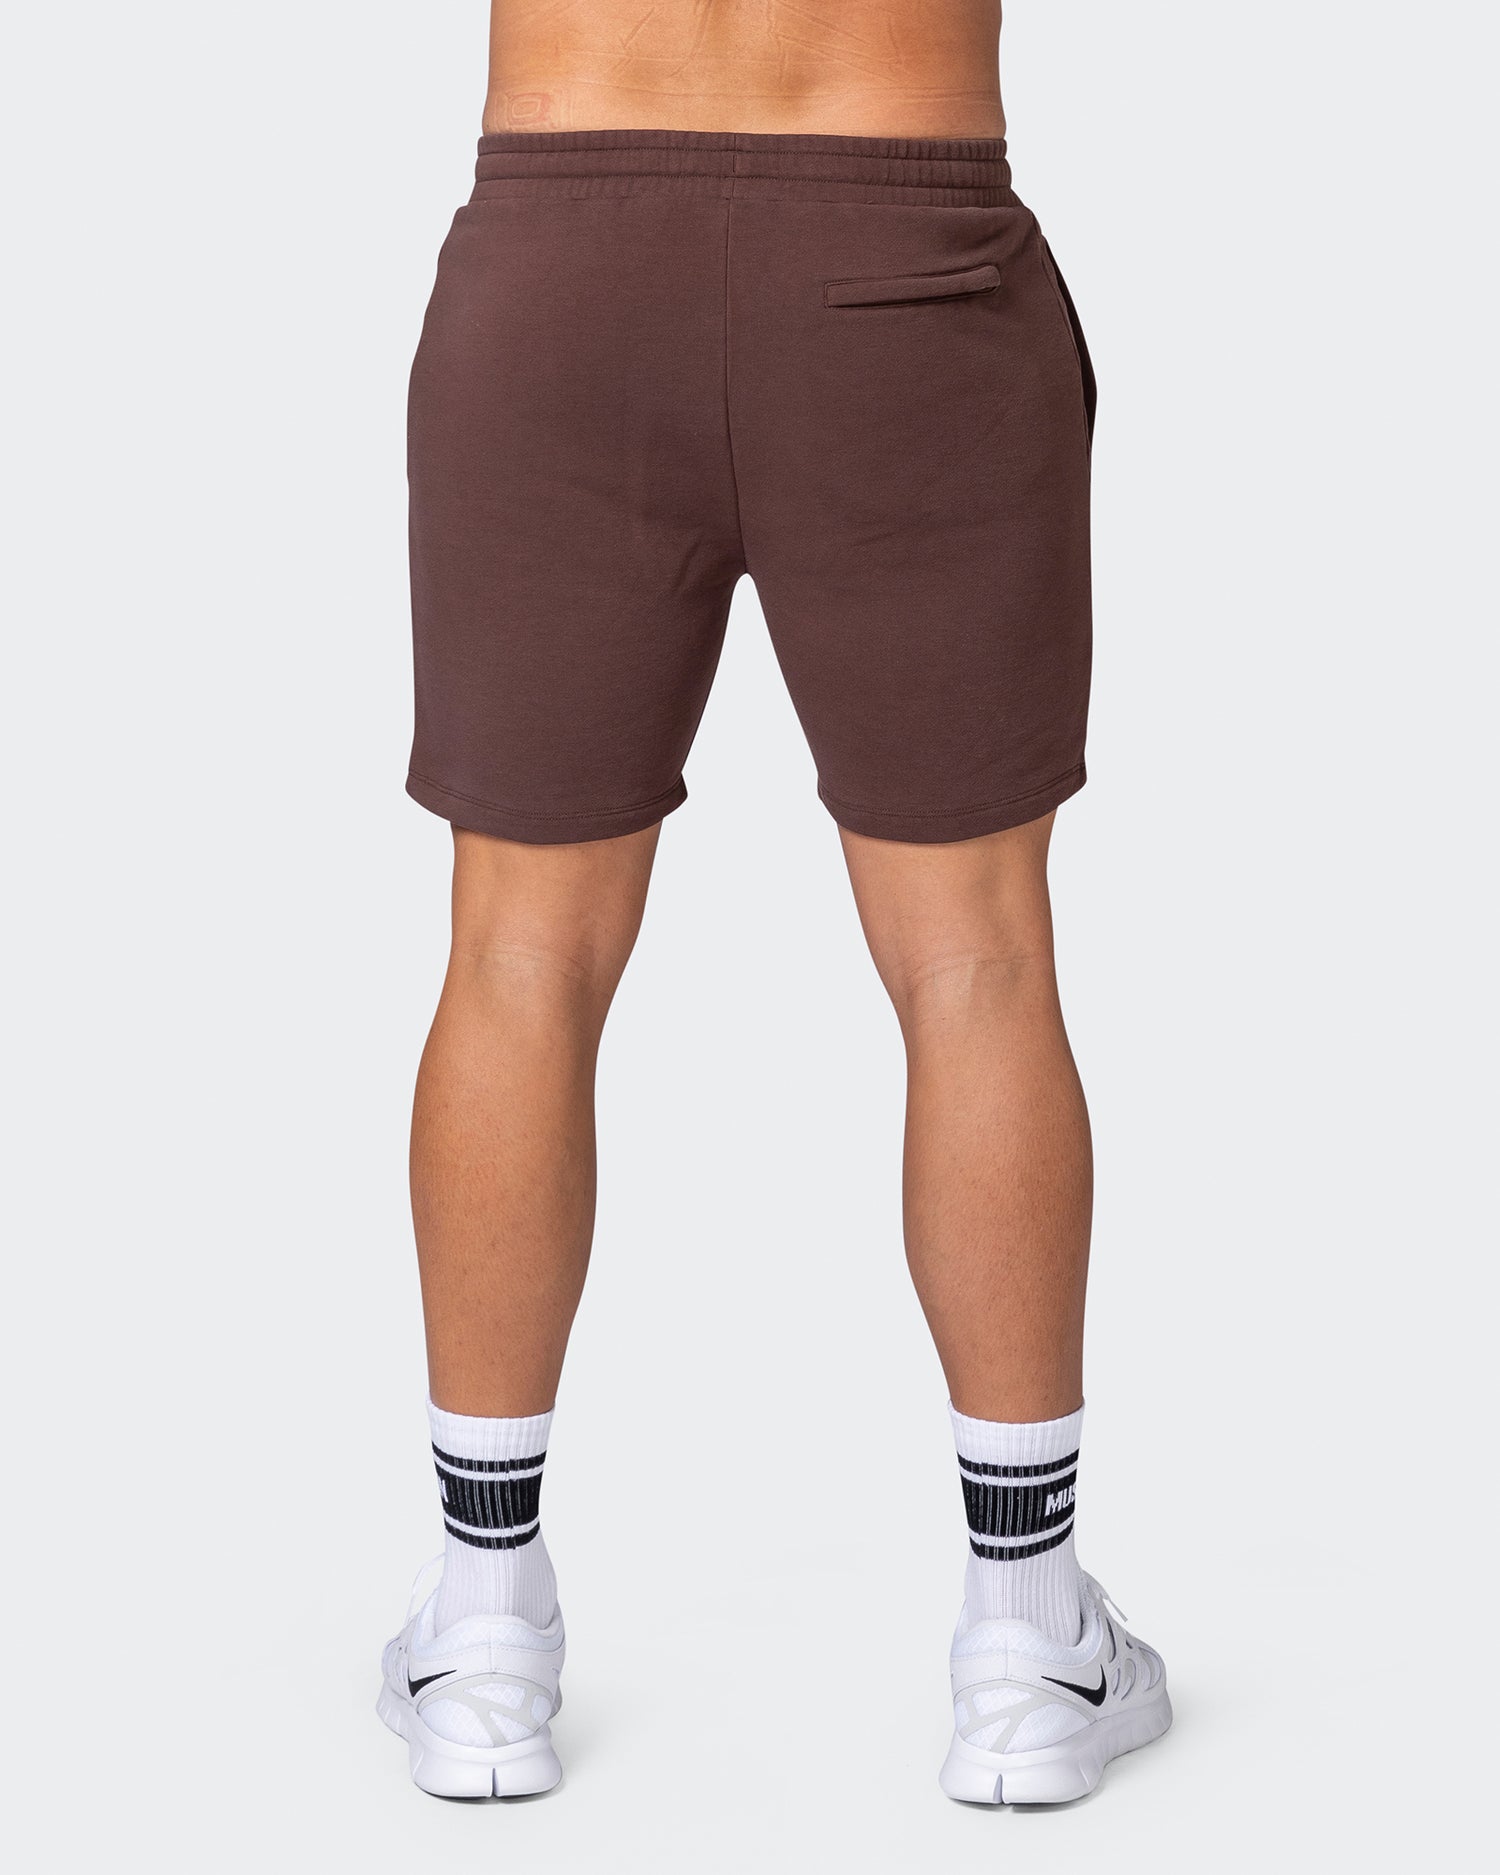 Infinite Vintage Shorts - Washed Coffee